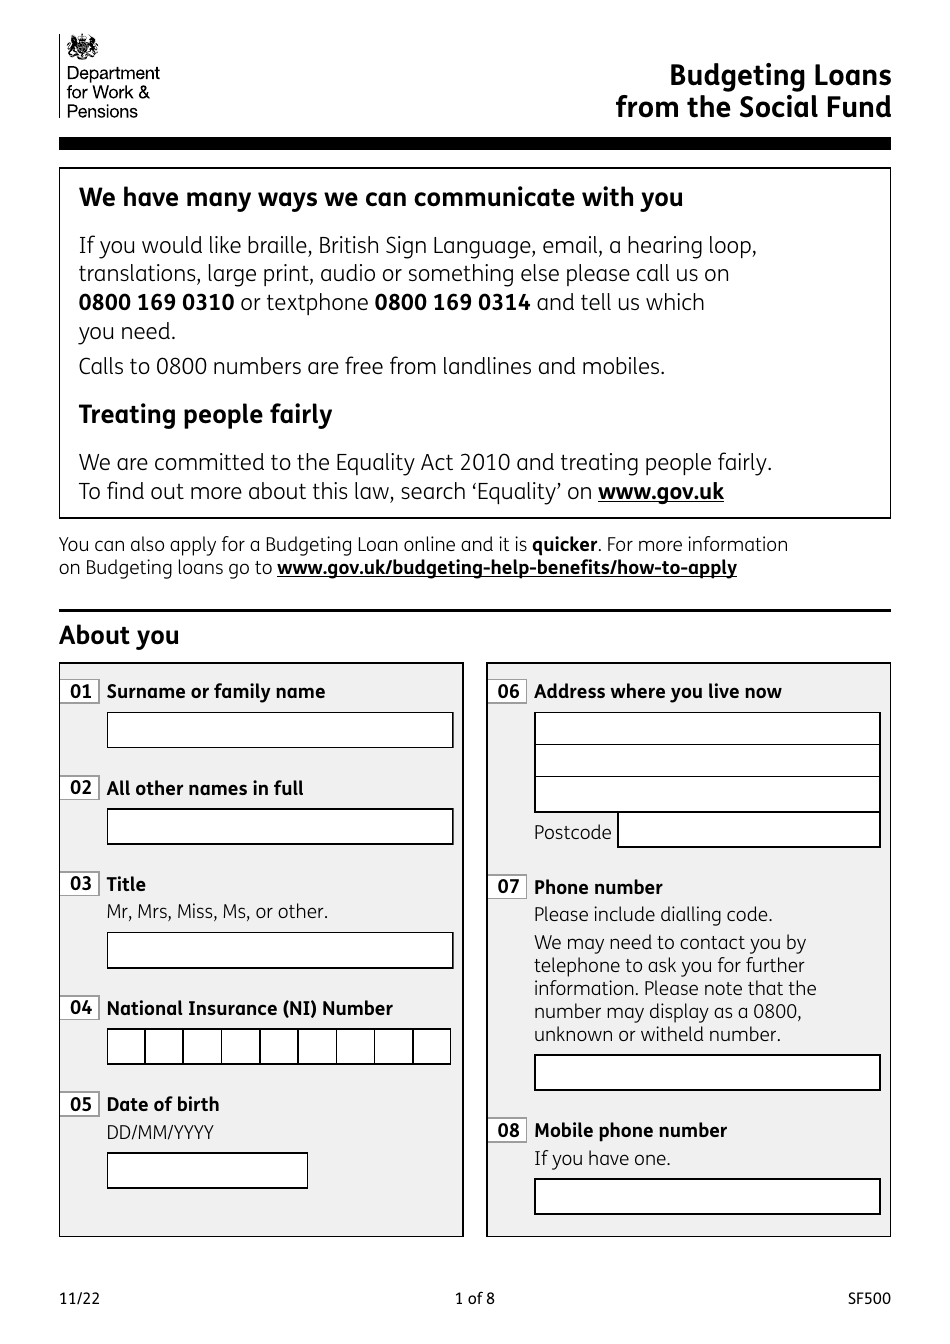 Form SF500 Budgeting Loans From the Social Fund - United Kingdom, Page 1